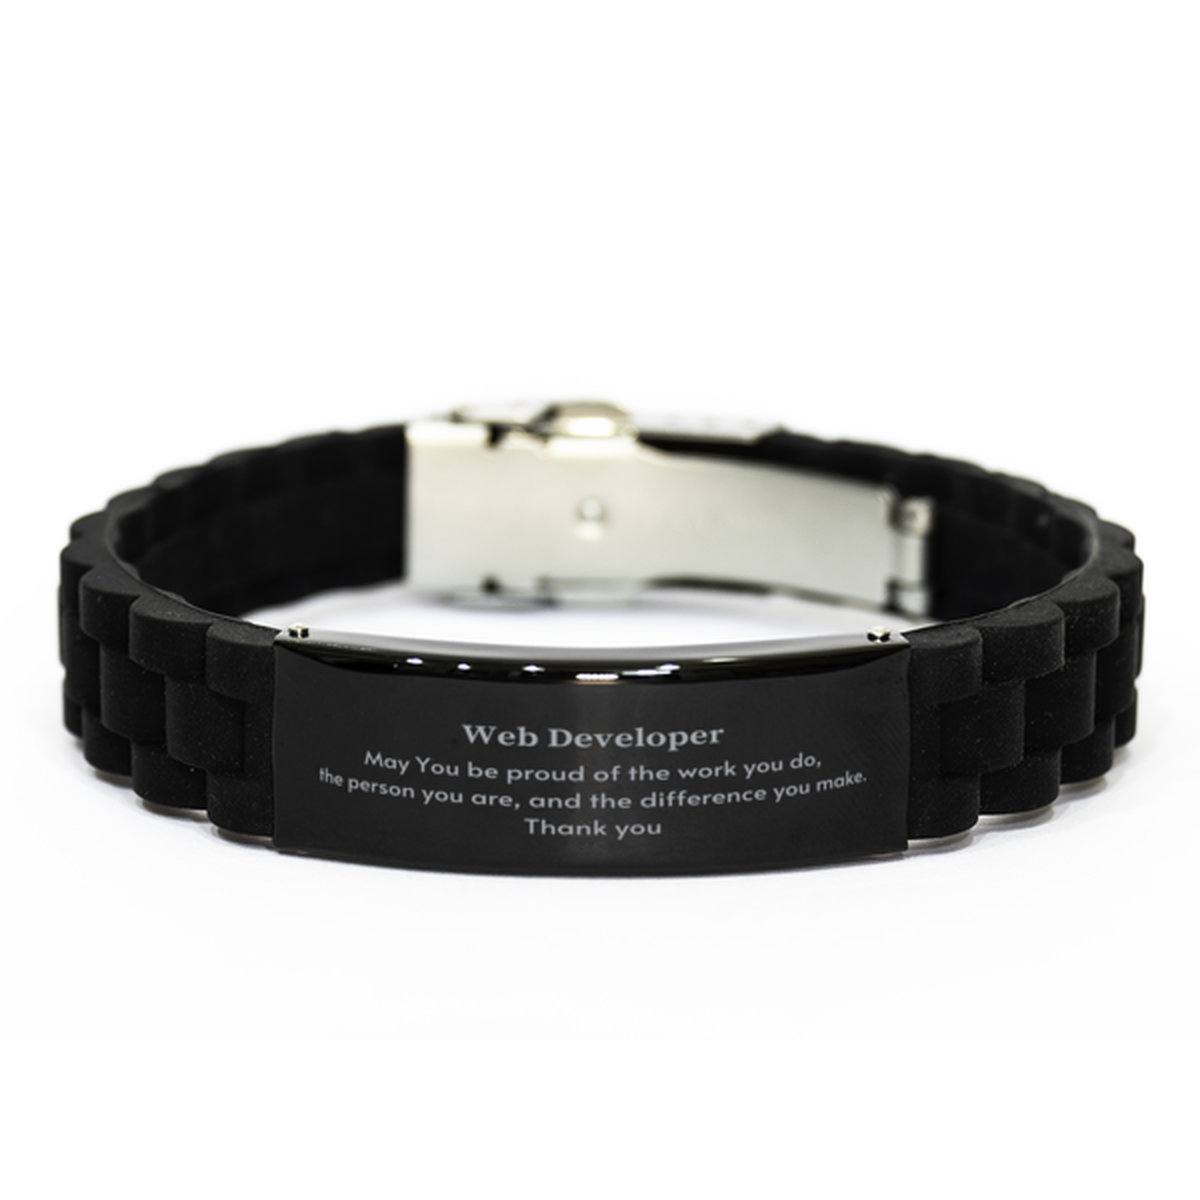 Heartwarming Black Glidelock Clasp Bracelet Retirement Coworkers Gifts for Web Developer, Web Developer May You be proud of the work you do, the person you are Gifts for Boss Men Women Friends